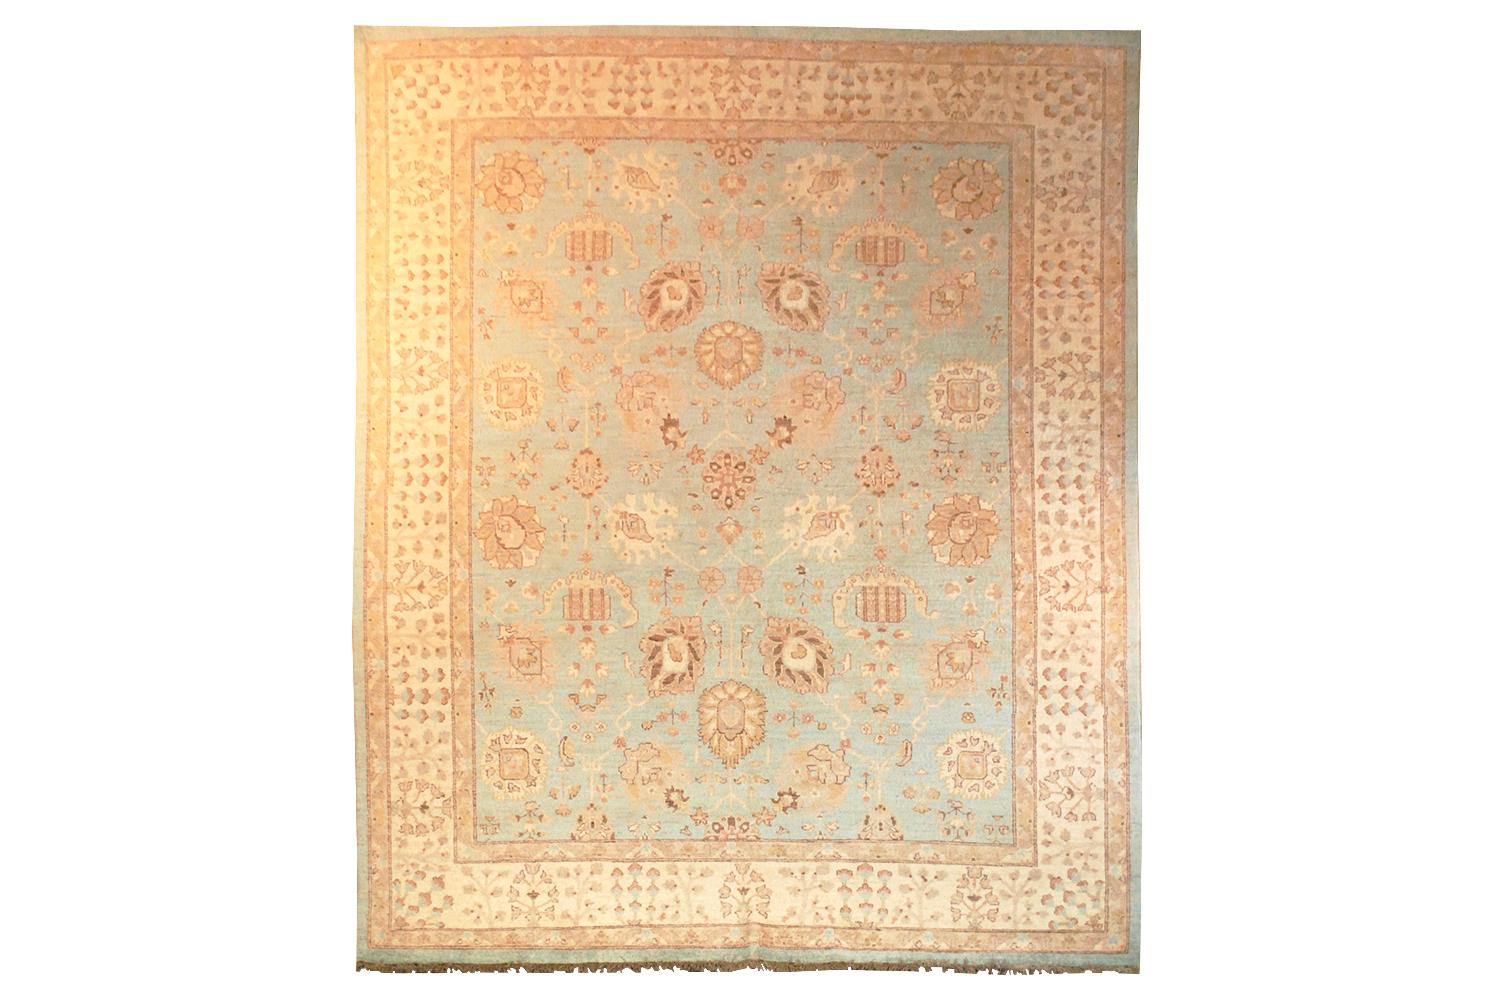 Chobi hand-knotted wool rug. Overall pattern in taupe, beige and brown. Background in shades of blue. Please note the rug has been photographed from both directions of weft to show light and dark directional weave. Measures: 8 x 9.